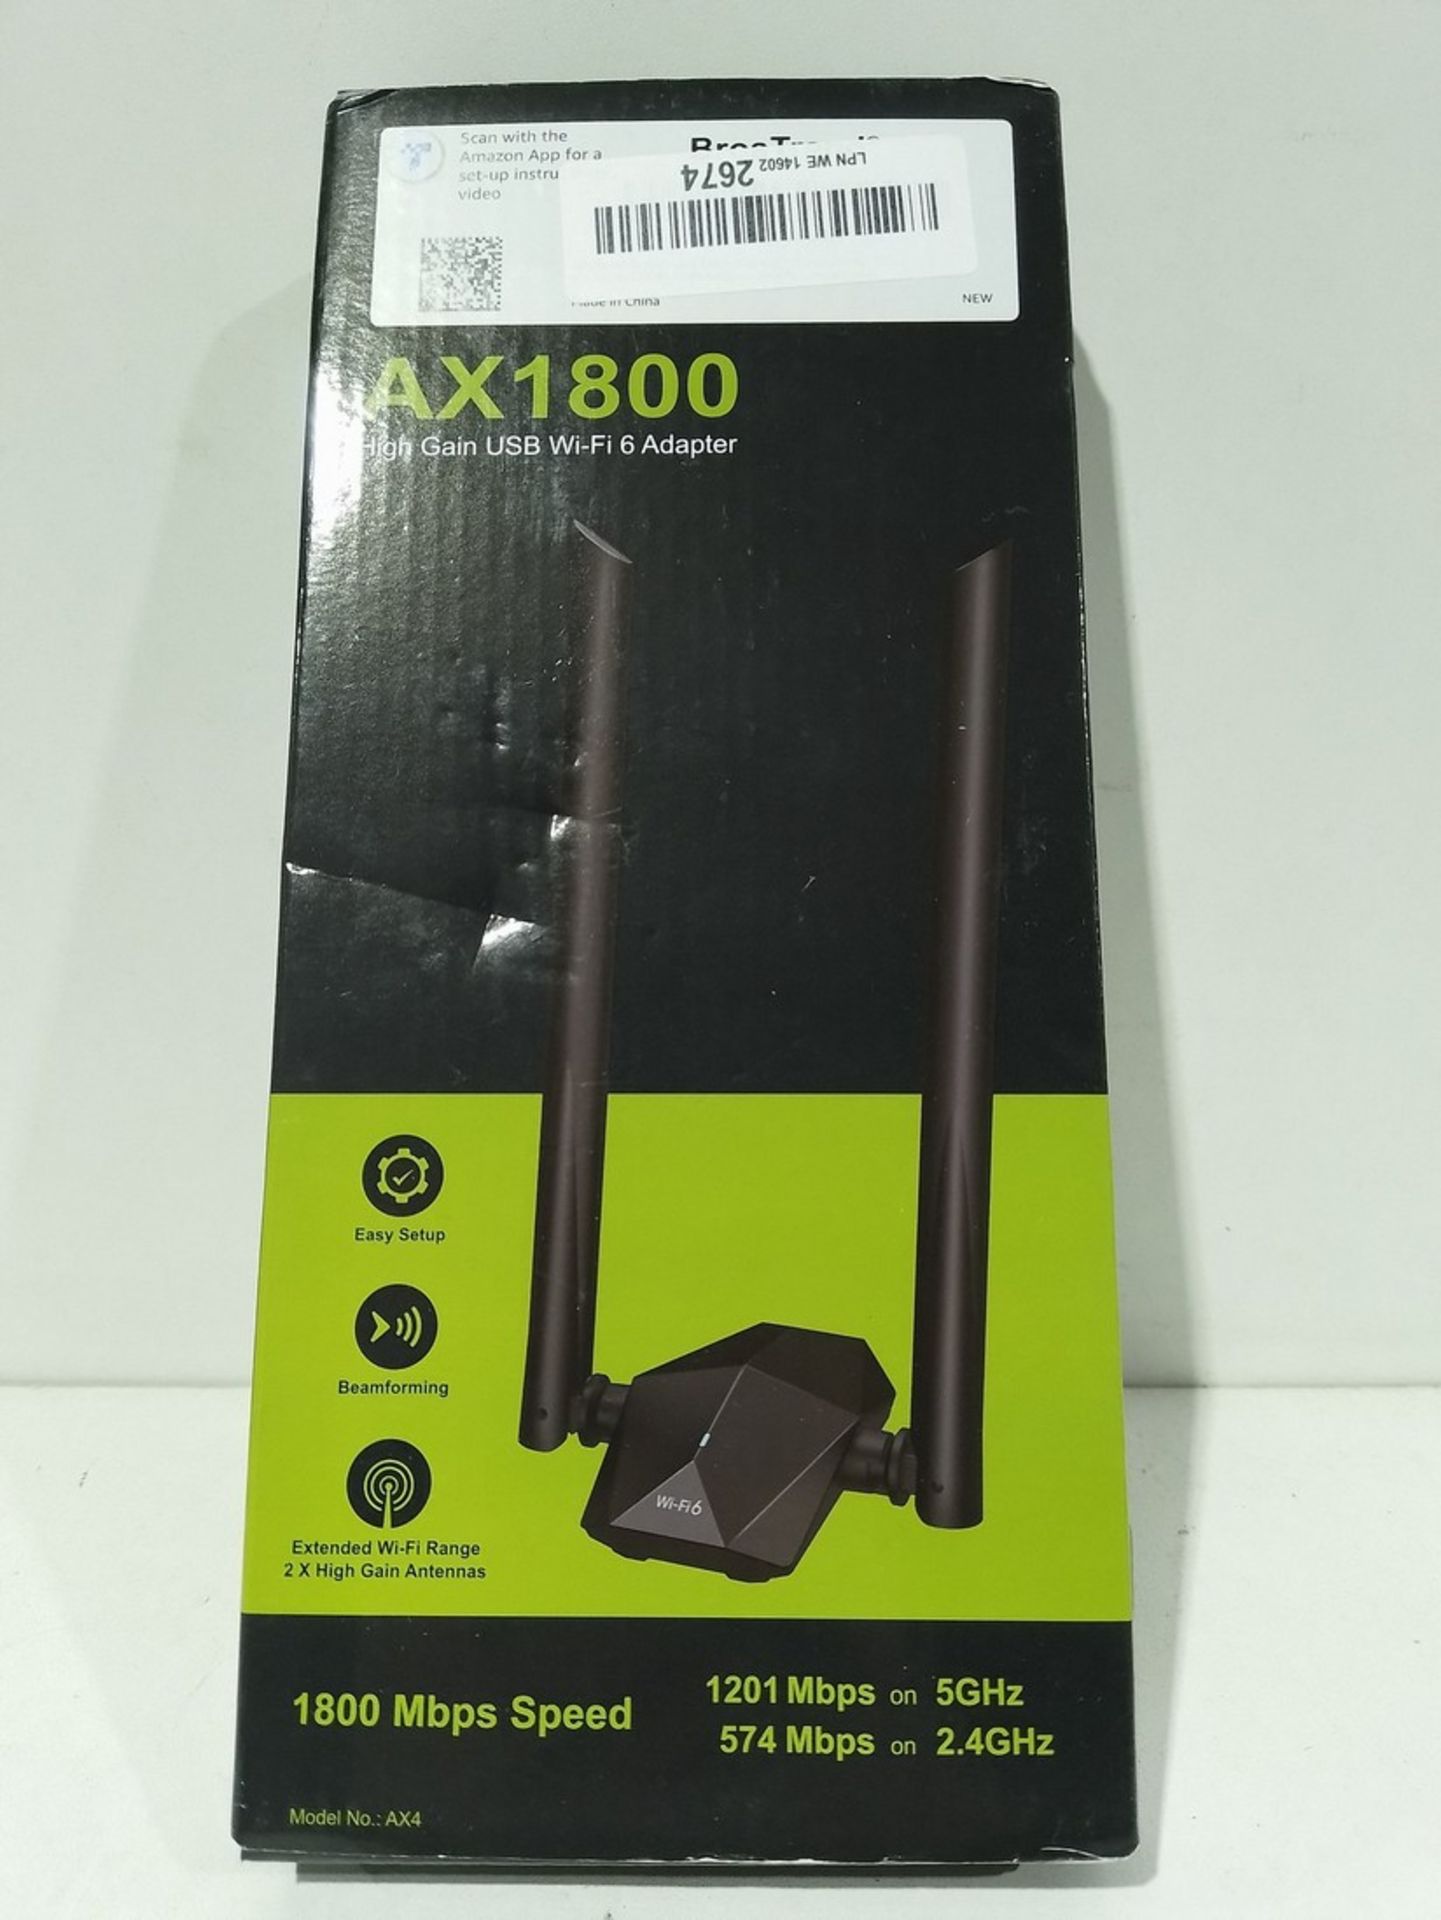 RRP £44.13 BrosTrend USB WiFi 6 Dongle Long Range 1800Mbps - Image 2 of 2